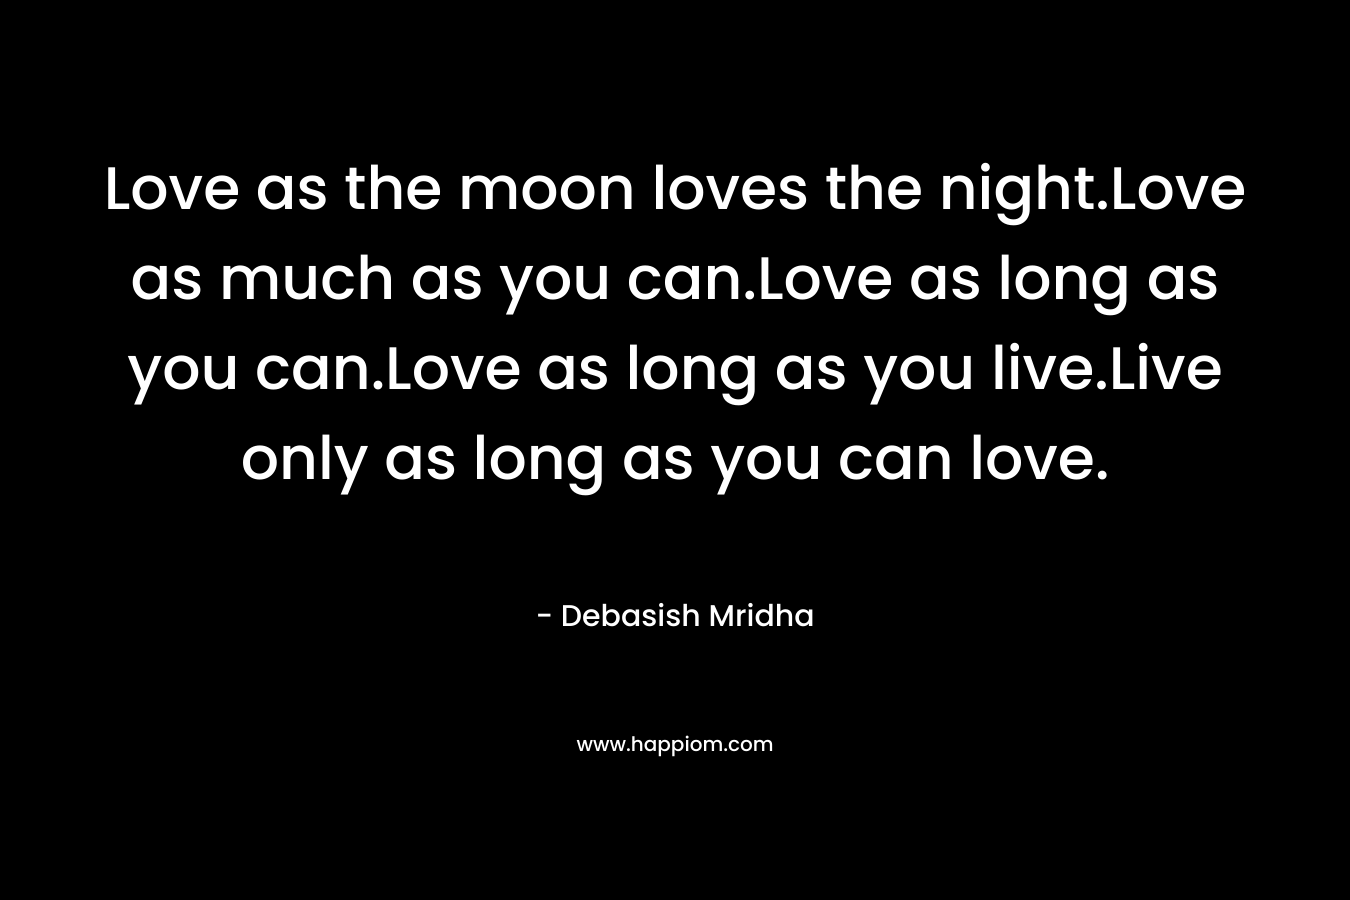 Love as the moon loves the night.Love as much as you can.Love as long as you can.Love as long as you live.Live only as long as you can love.